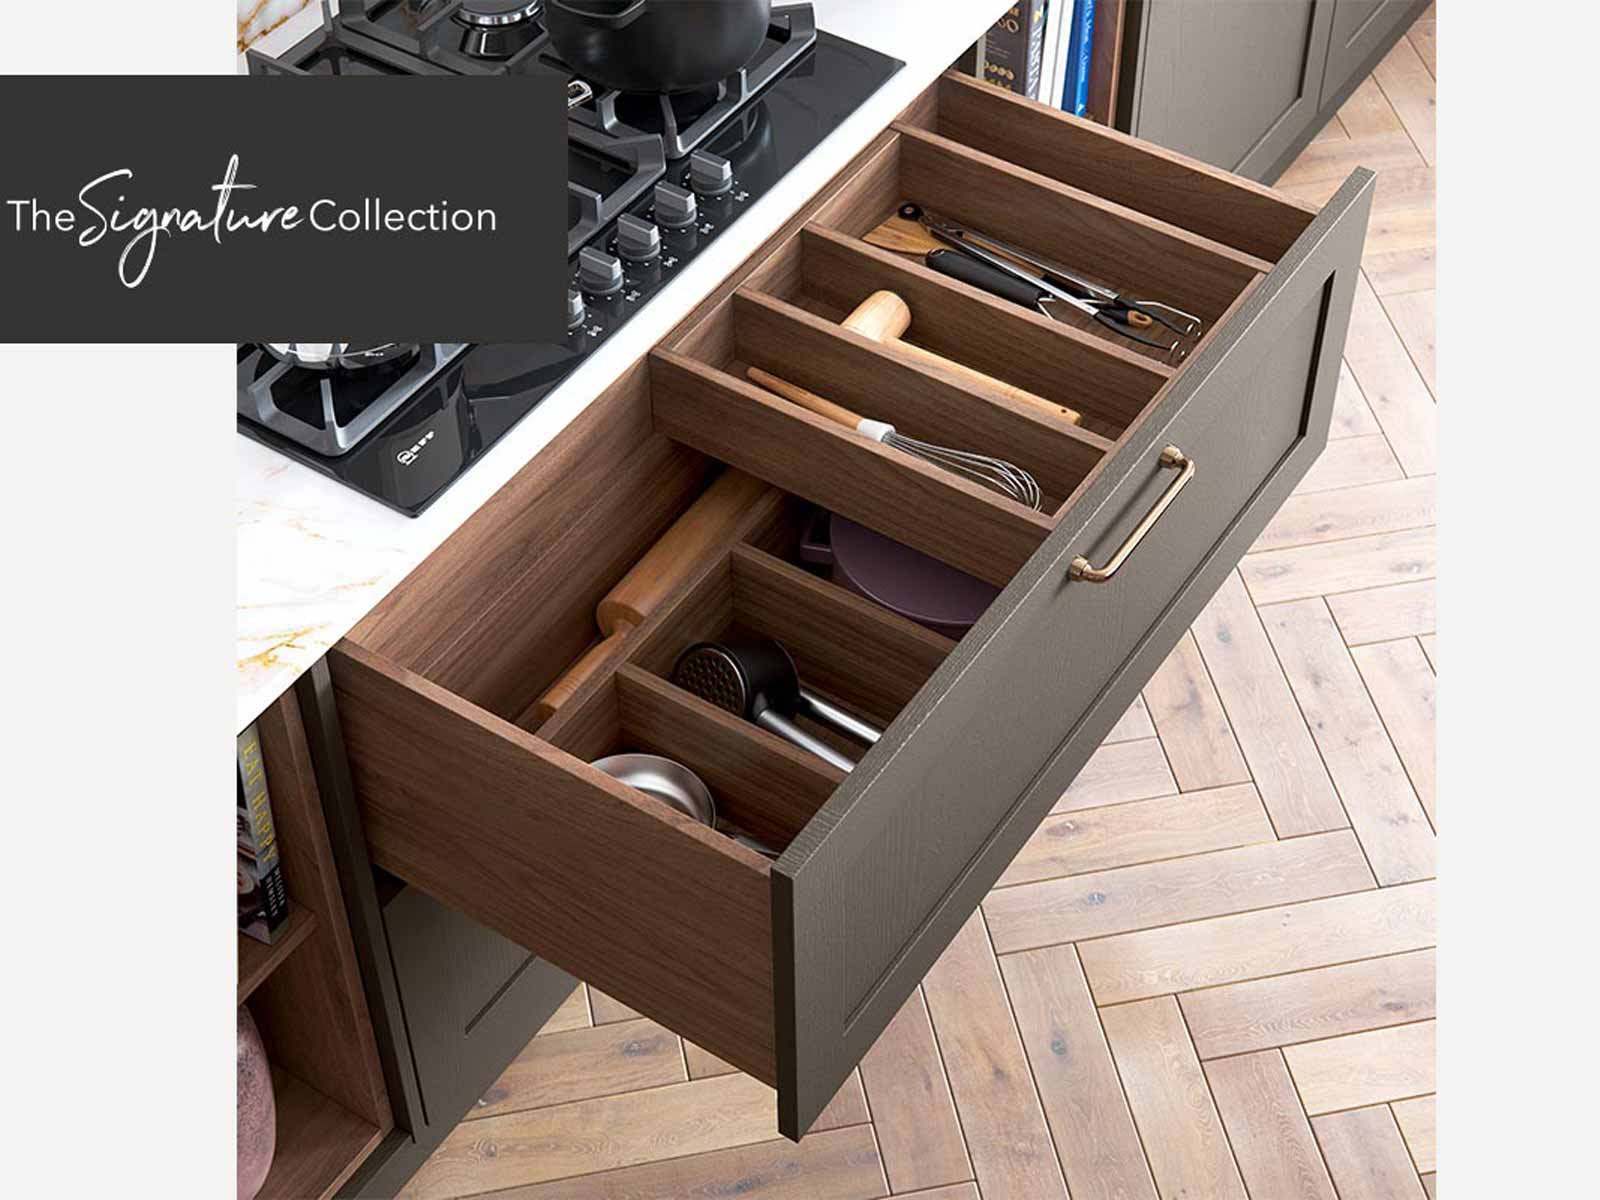 Extended kitchen drawer with wooden interior for utensils